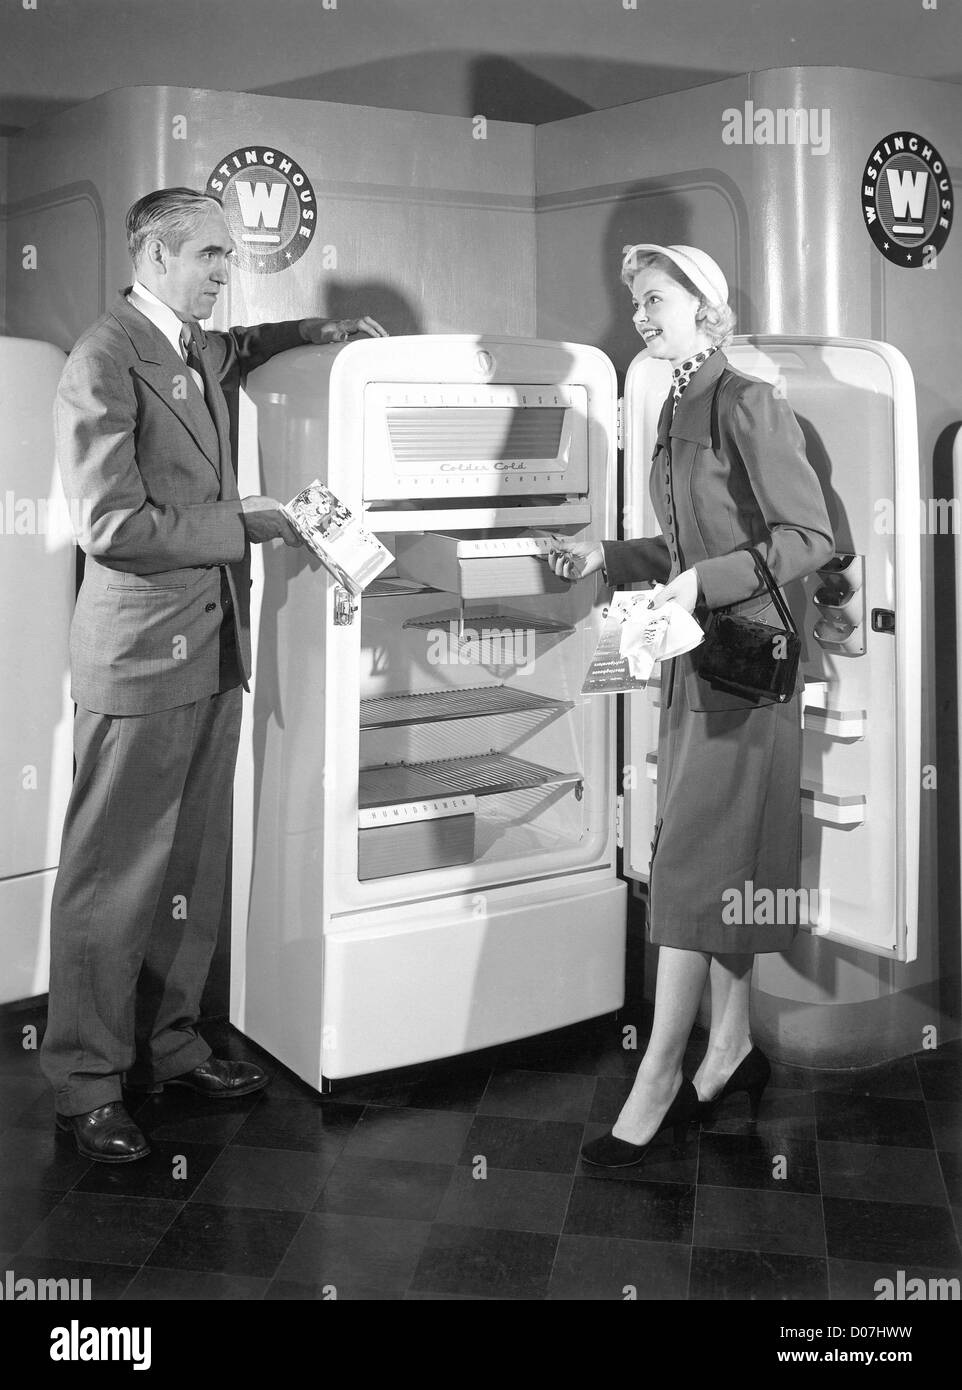 Woman shopping for refrigerator Stock Photo